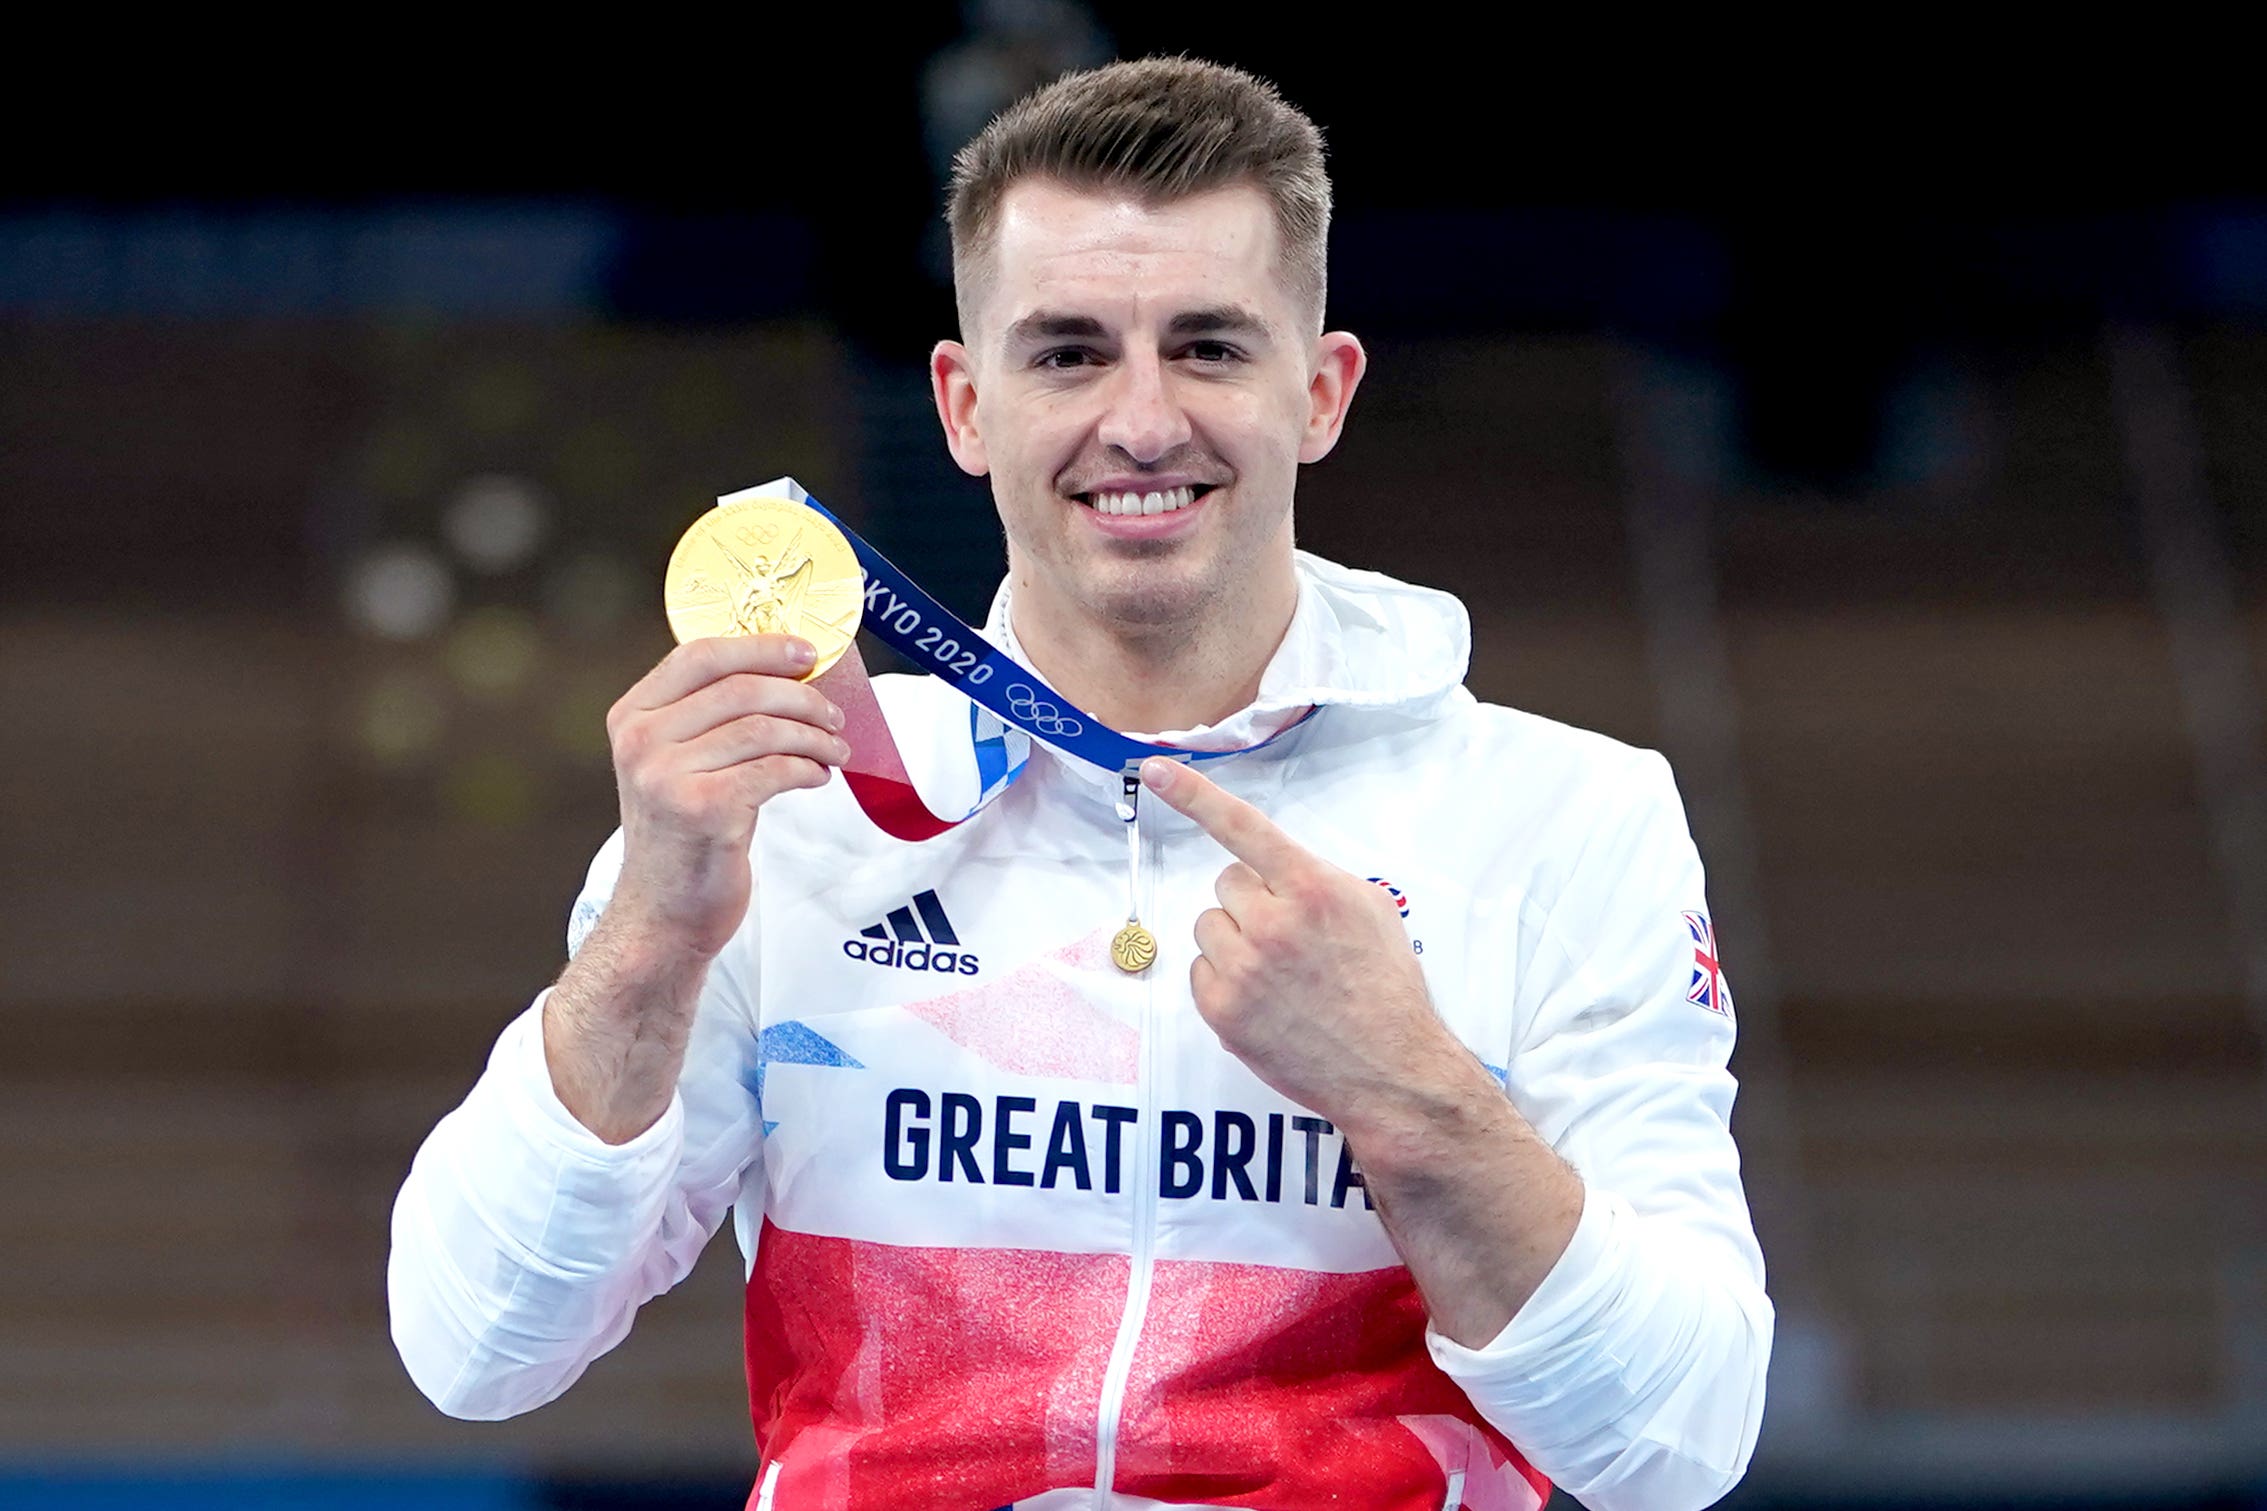 Max Whitlock has a total of six Olympic medals and is looking to win a seventh in the upcoming games